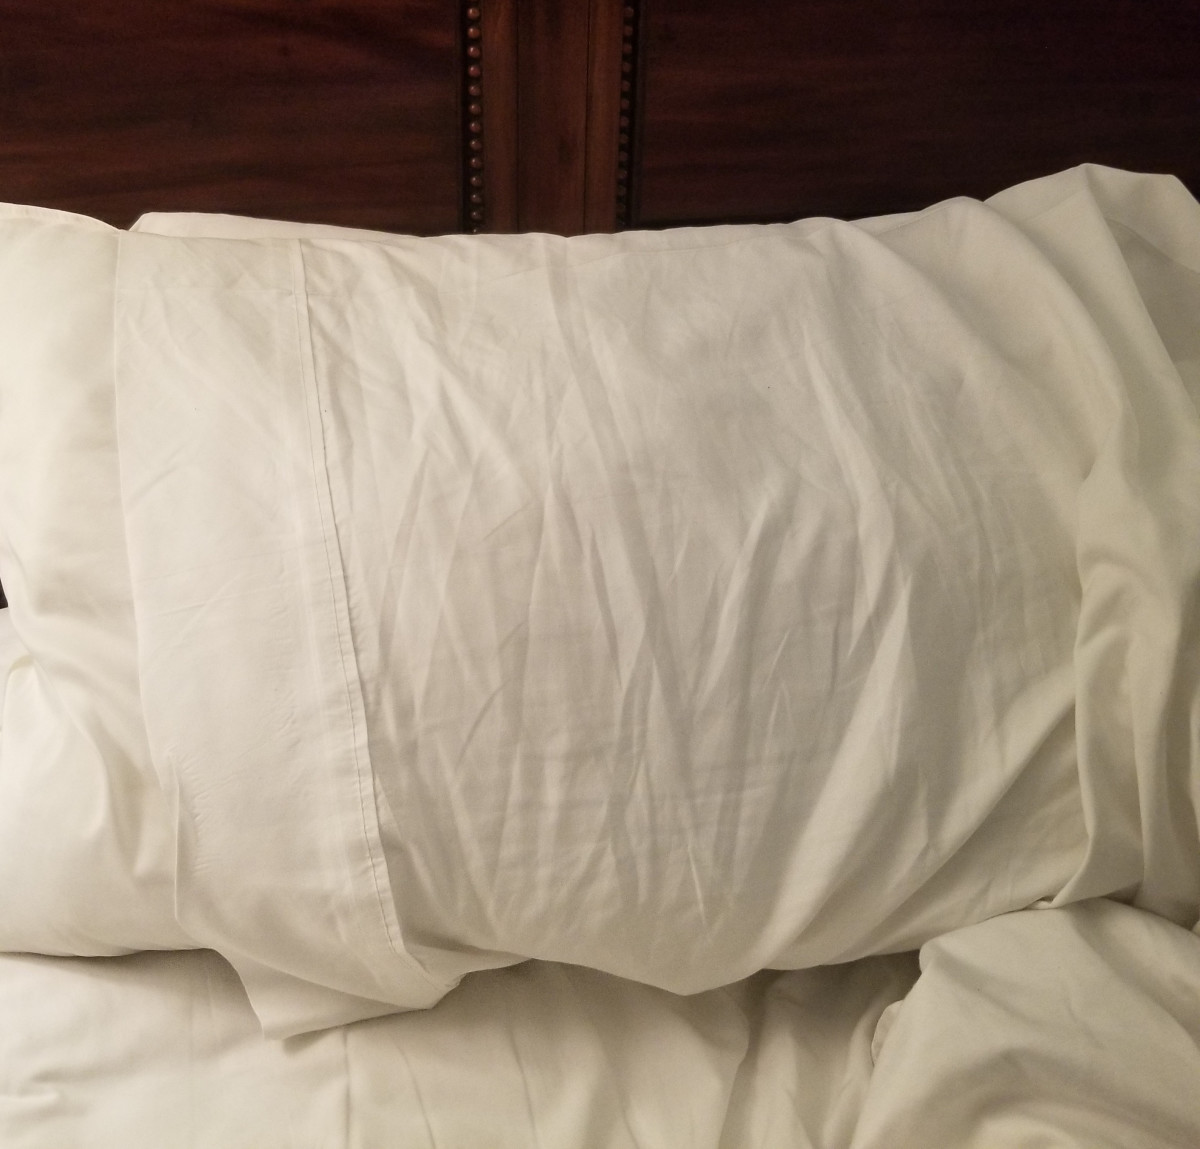 The Art of Stealing and Keeping Pillows When Sleeping With a Spouse or Significant Other